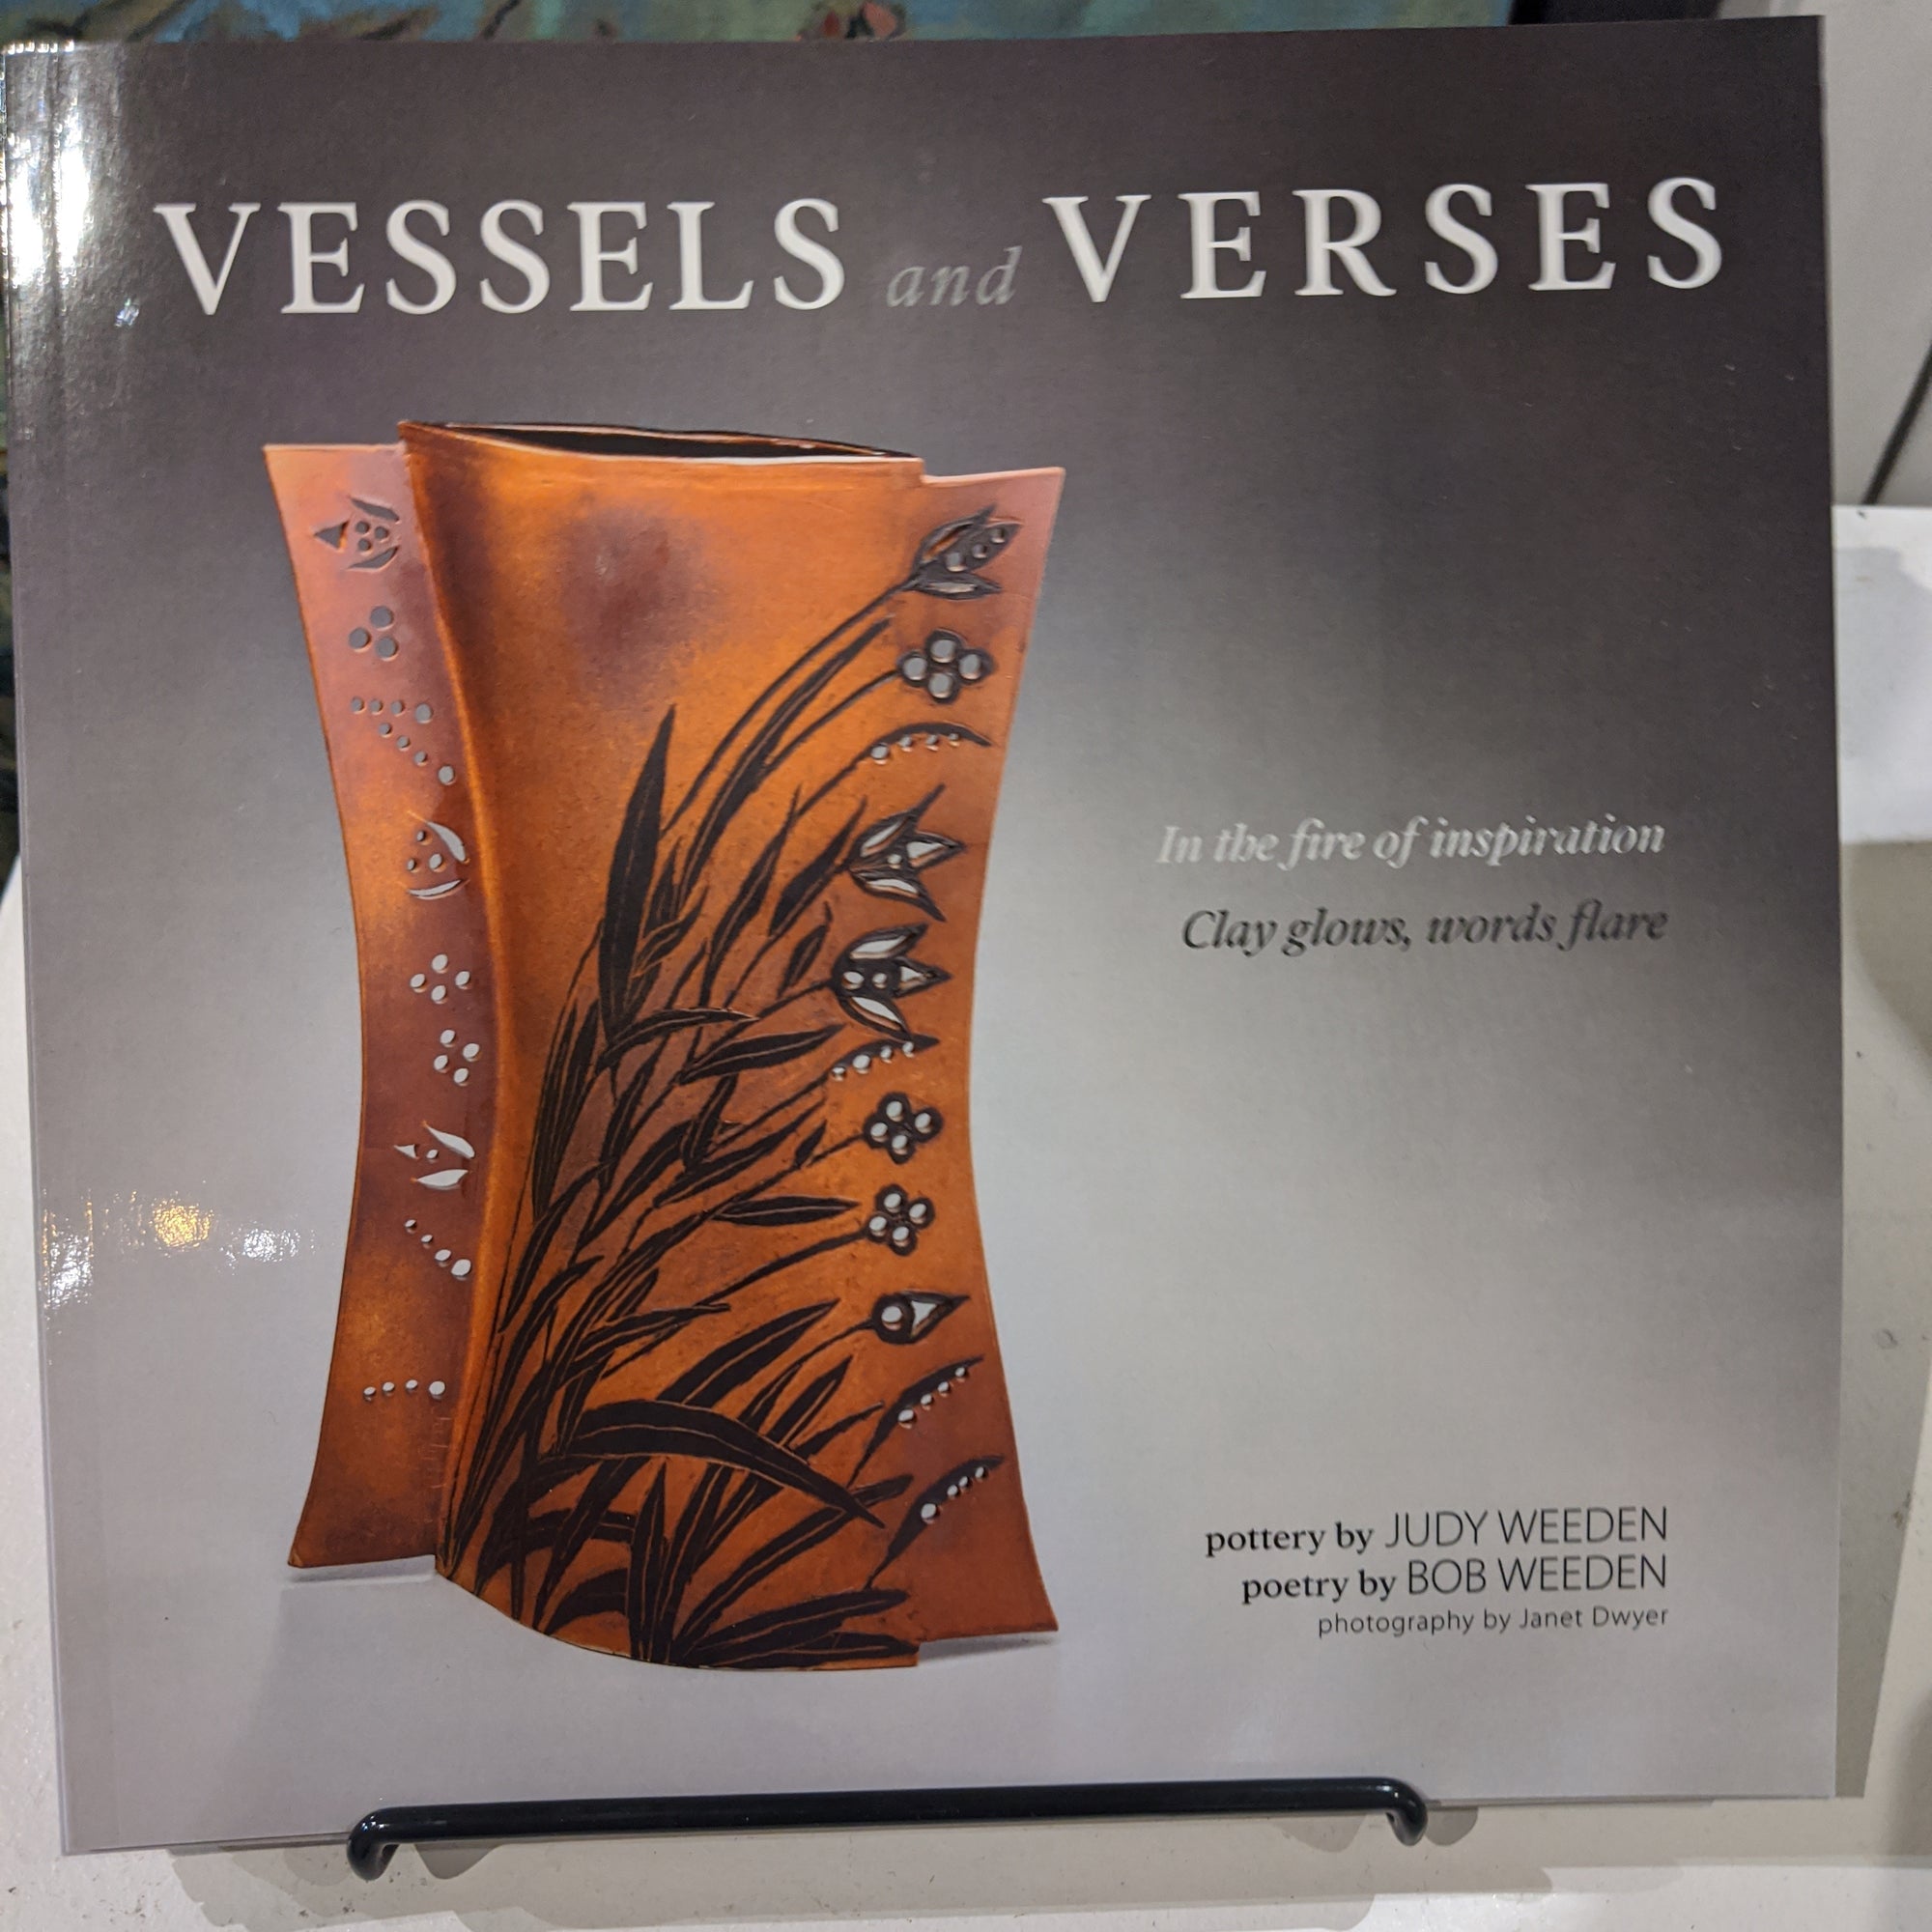 Vessels and Verses